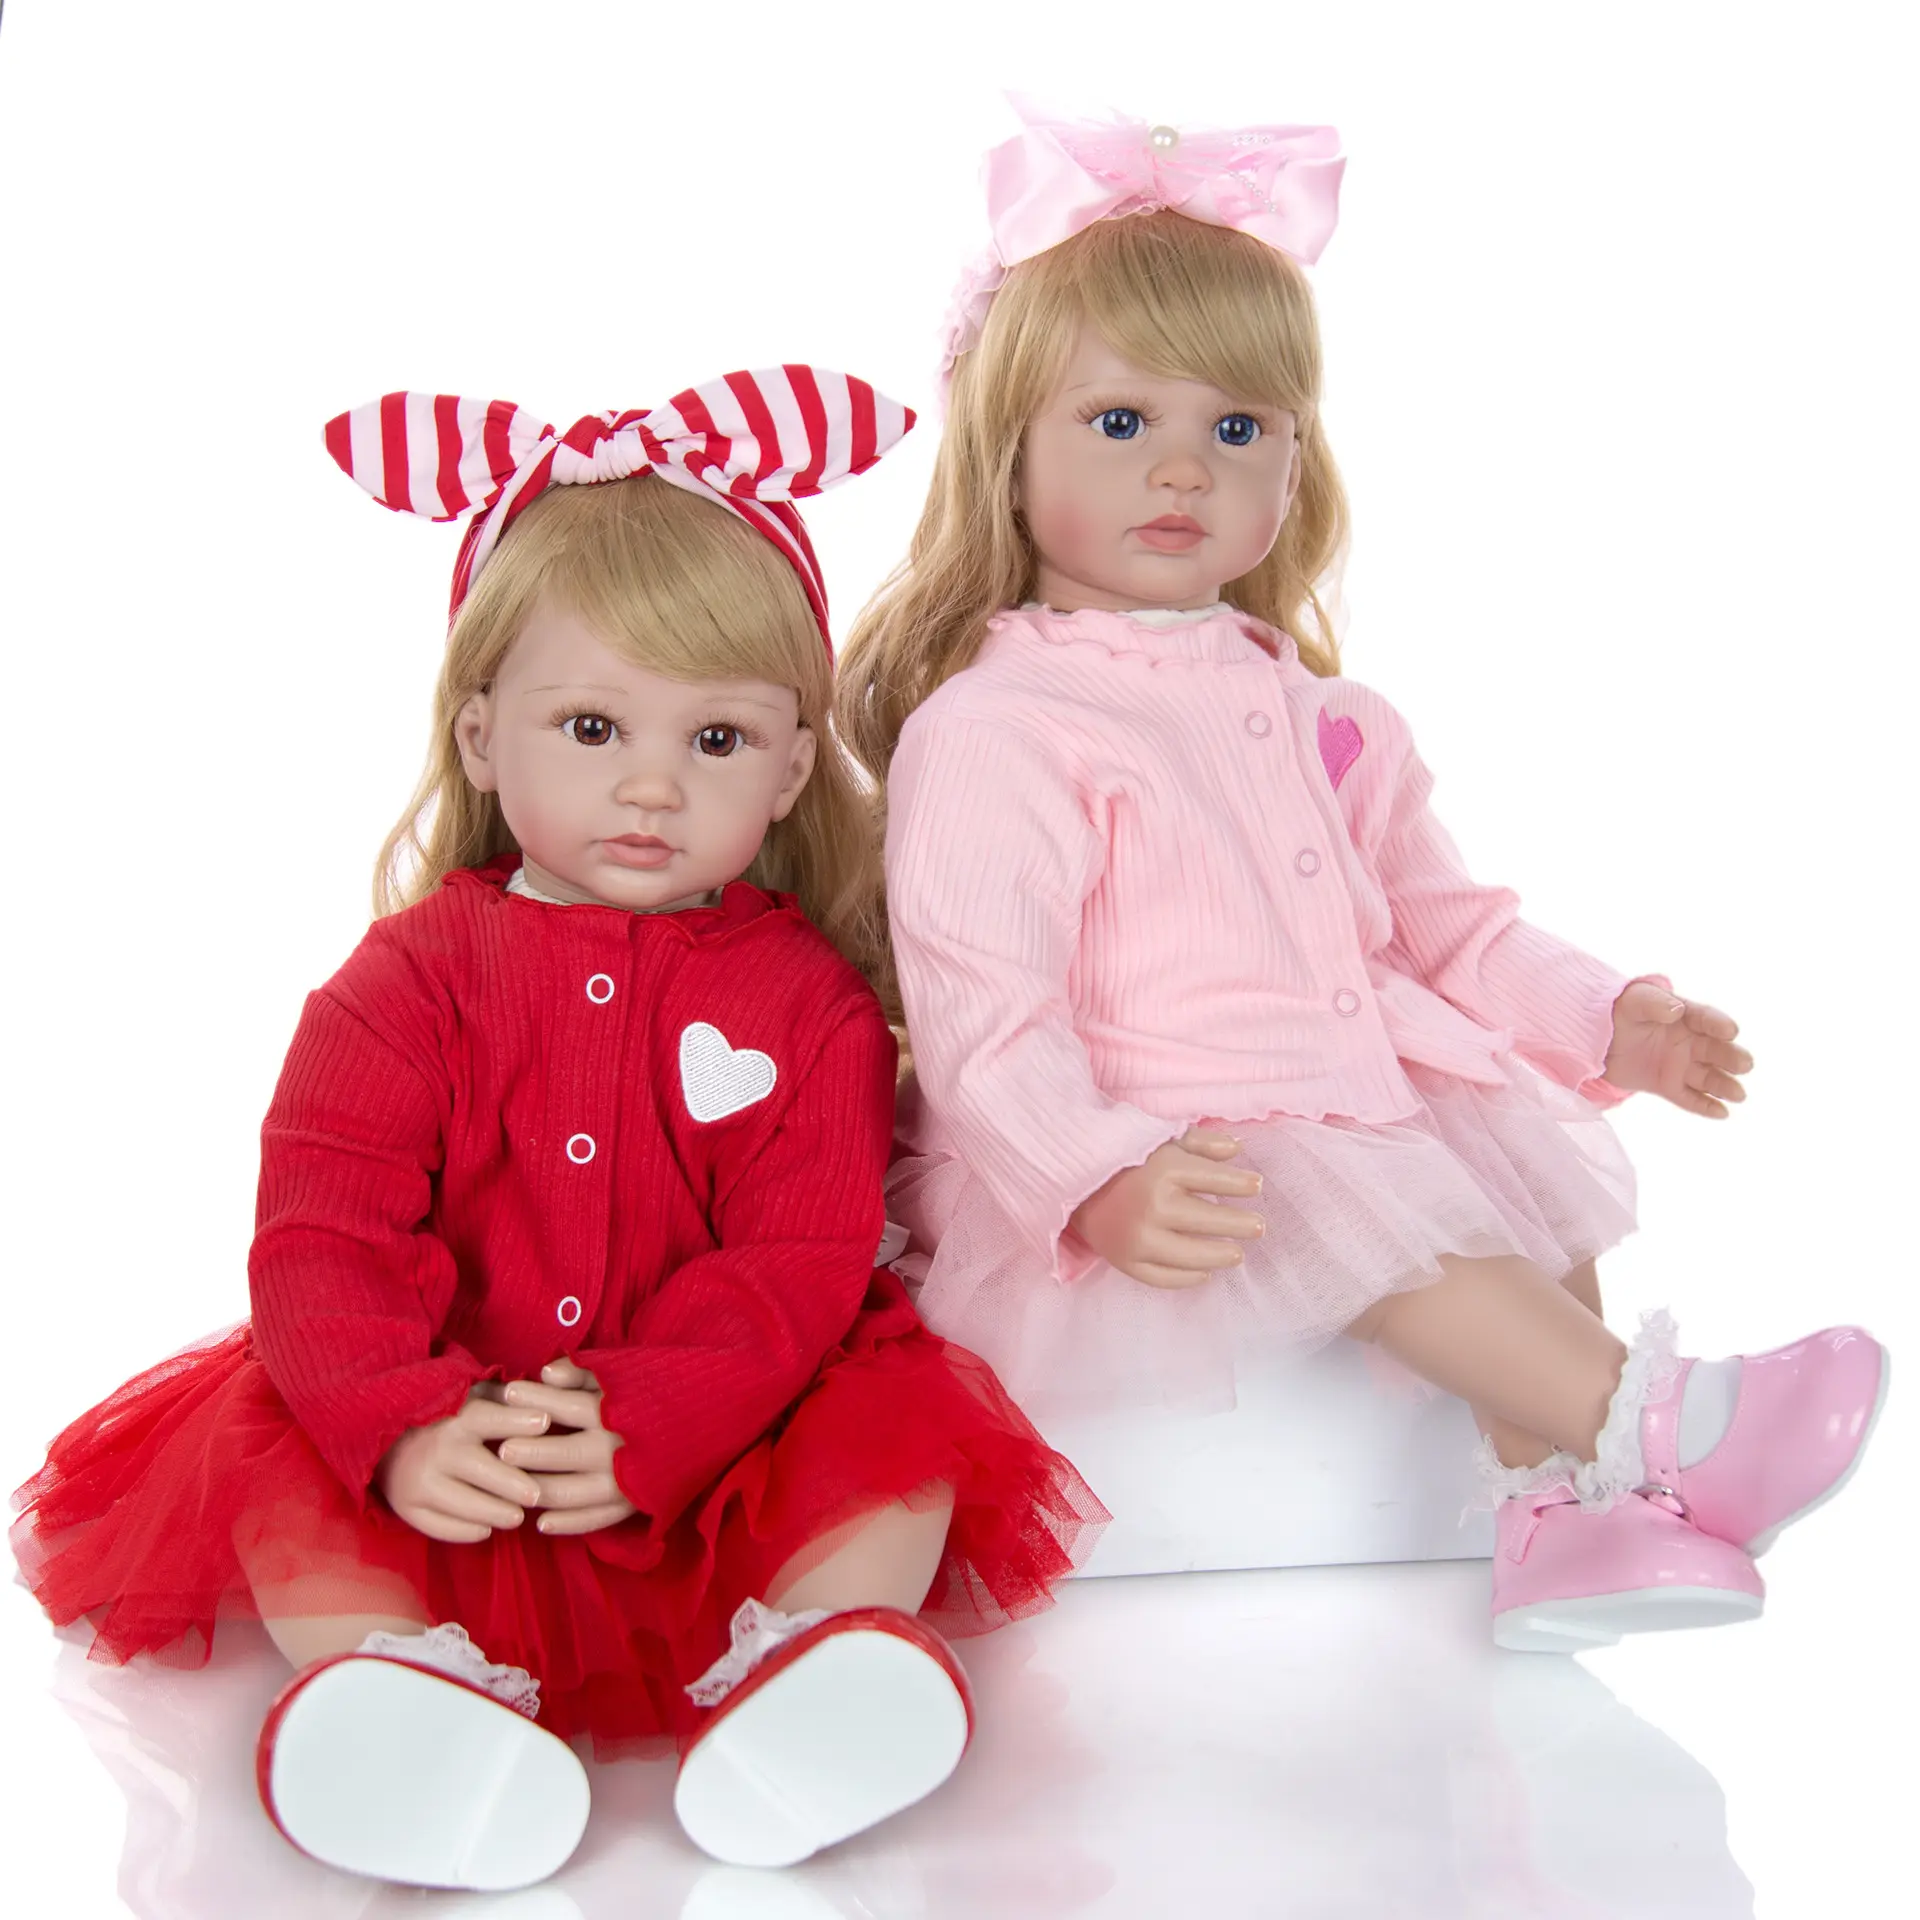 Hot sell reborn doll 60cm twin sisters Girl lifelike reborn baby dolls soft silicone for girl's gift Baby Doll